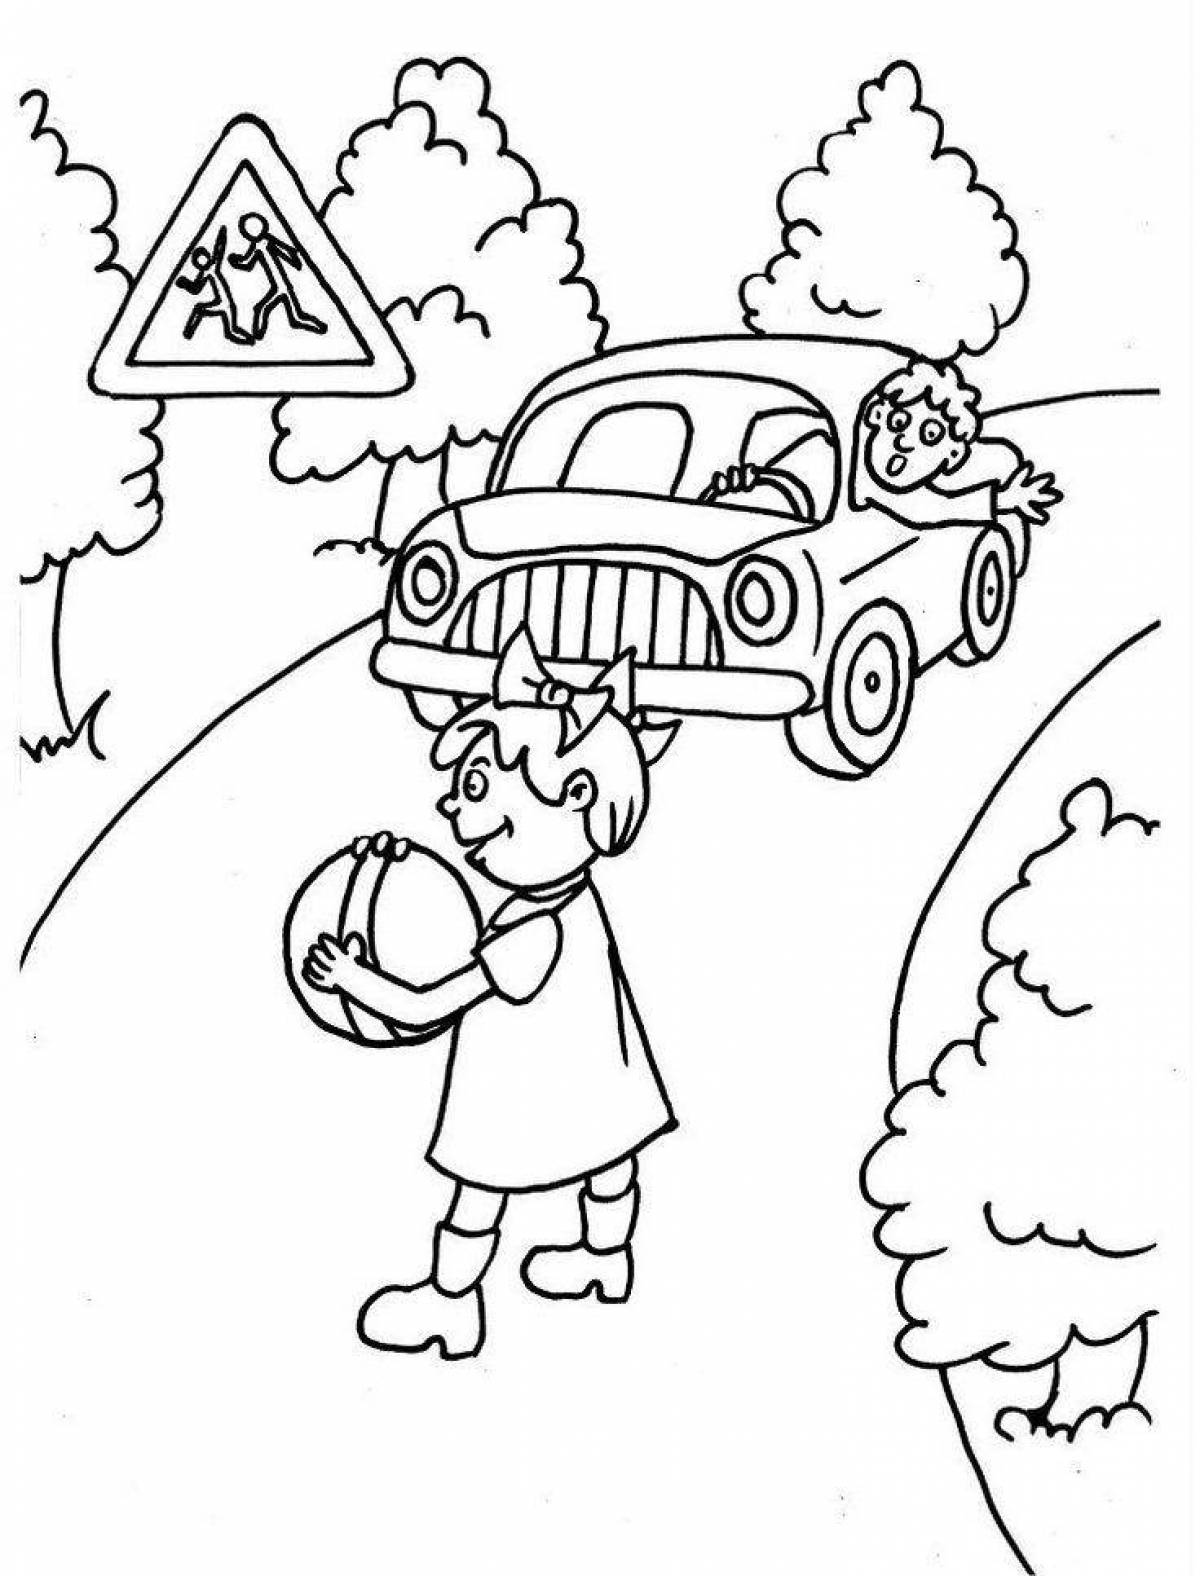 A fun coloring page 